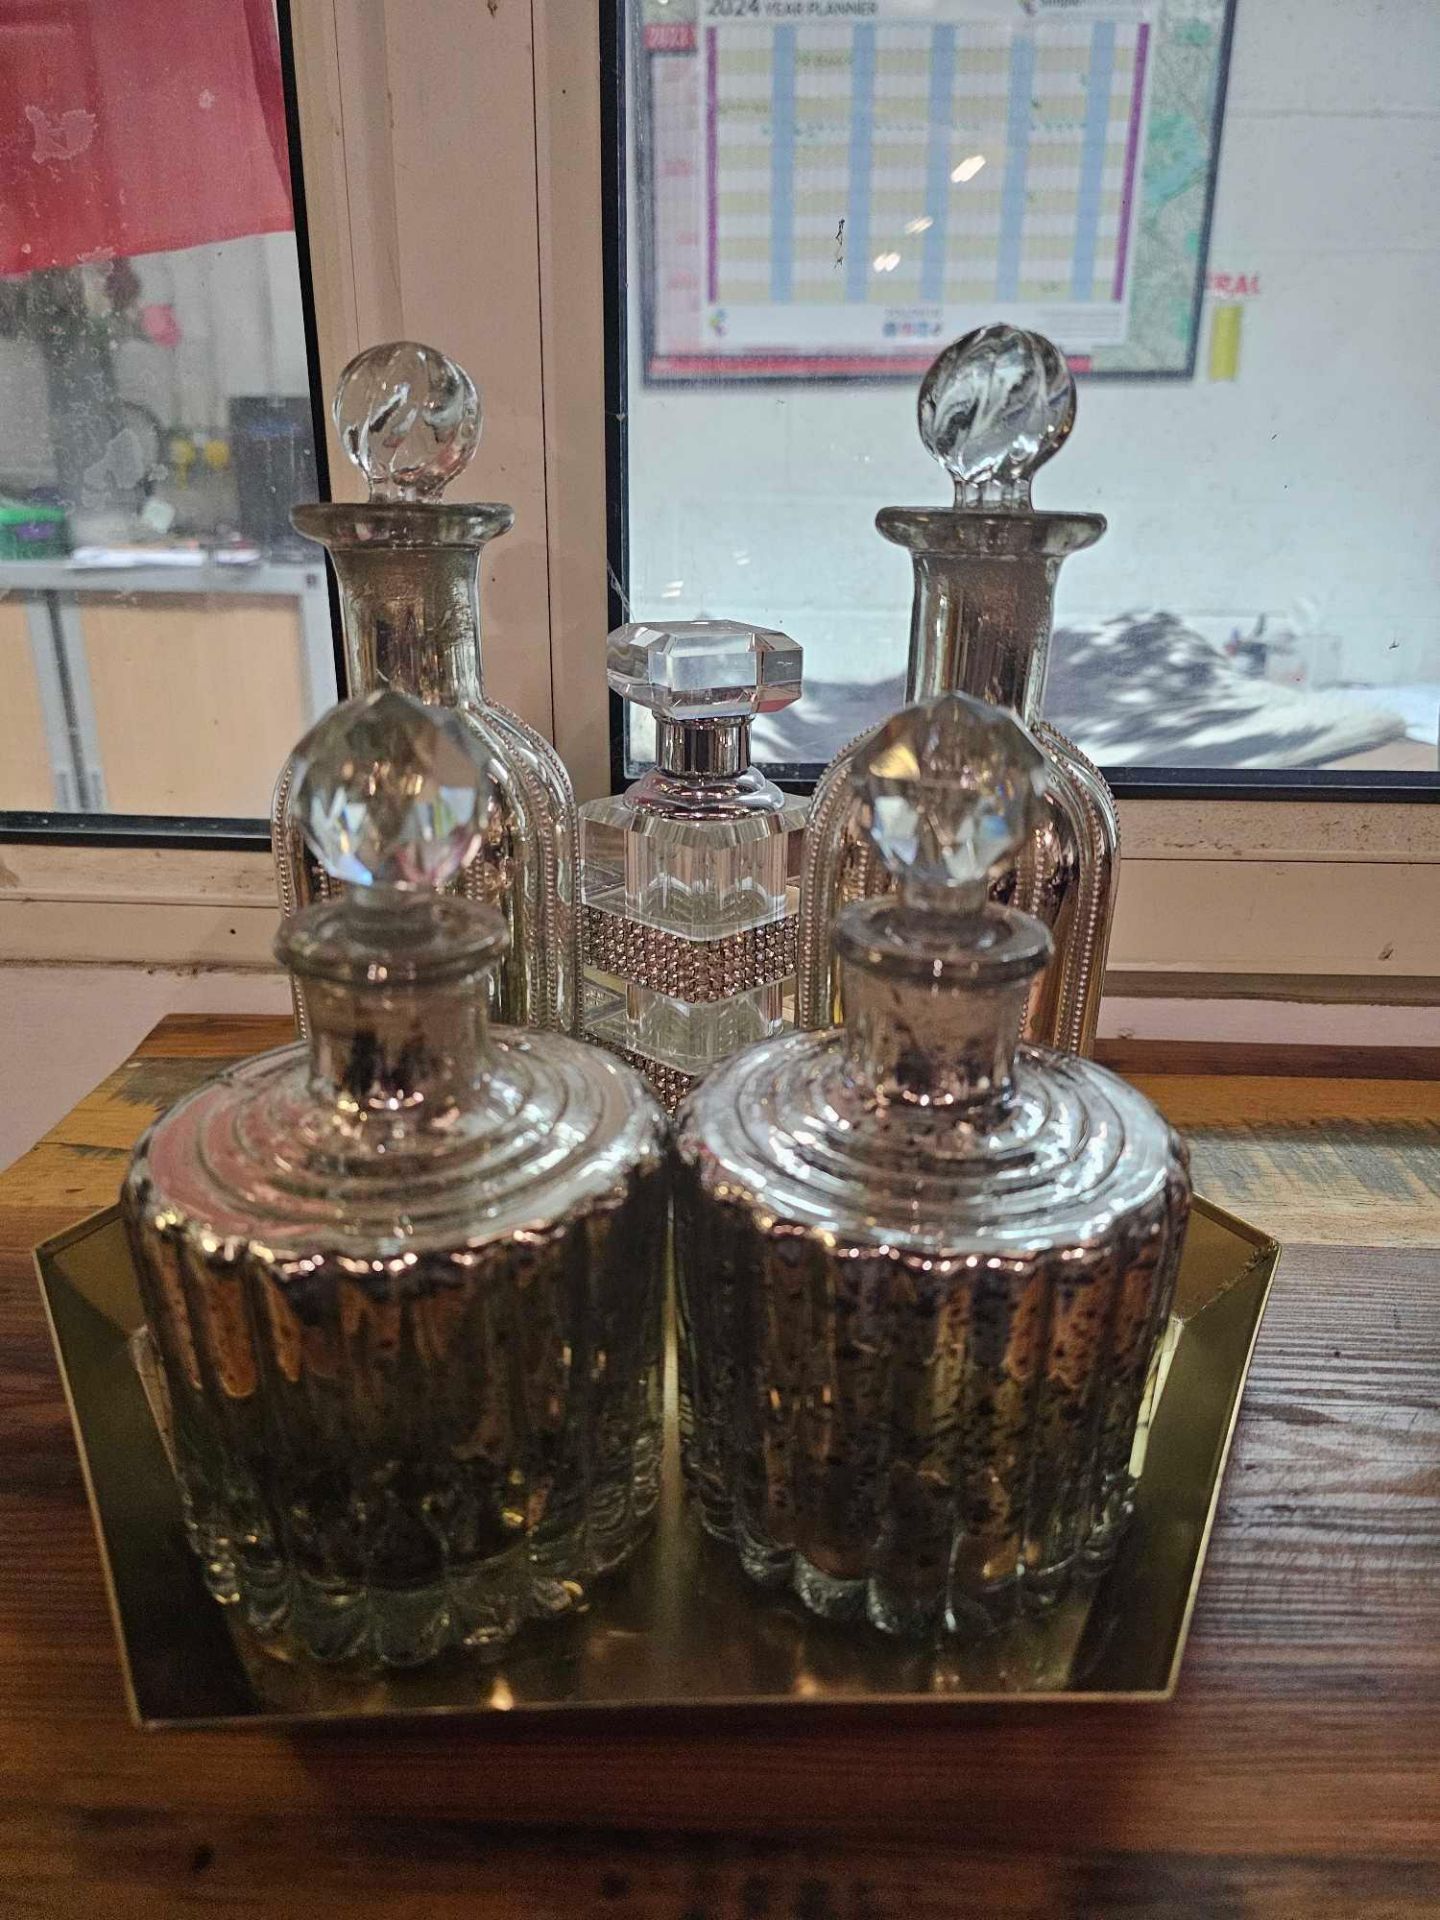 Decorative Objects To Include 5 x Decanter Bottles With Stoppers And A Shaped Tray